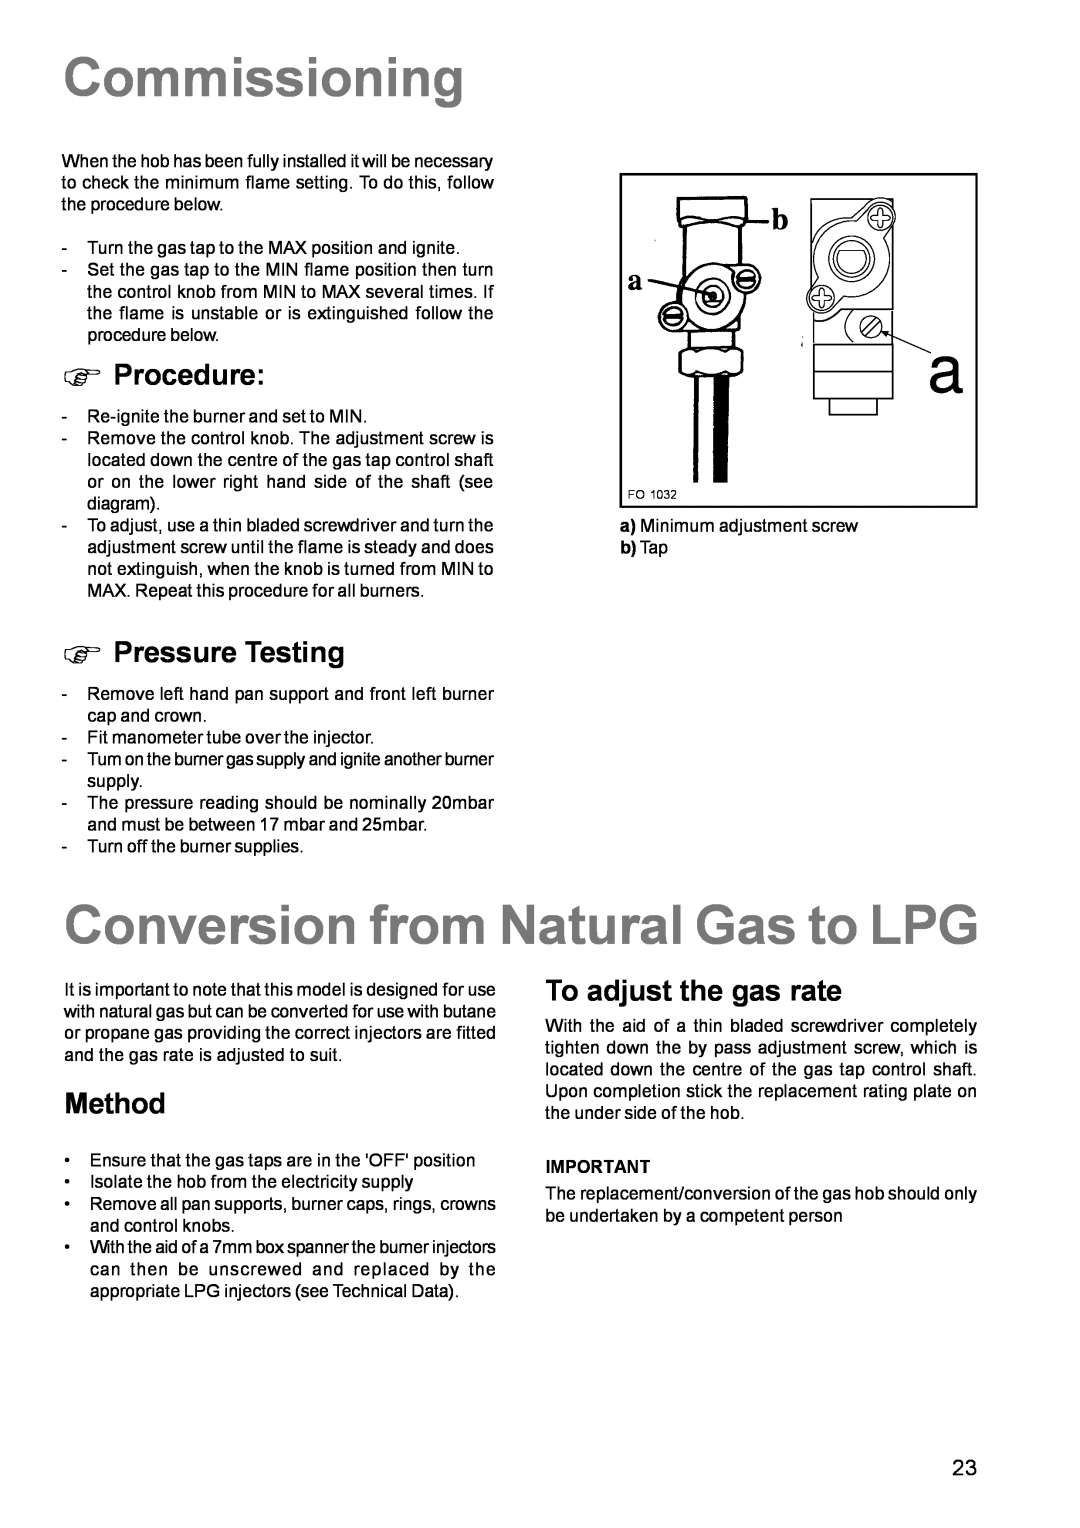 Zanussi ZCM 611 manual Commissioning, Conversion from Natural Gas to LPG, ΦProcedure, ΦPressure Testing, Method 